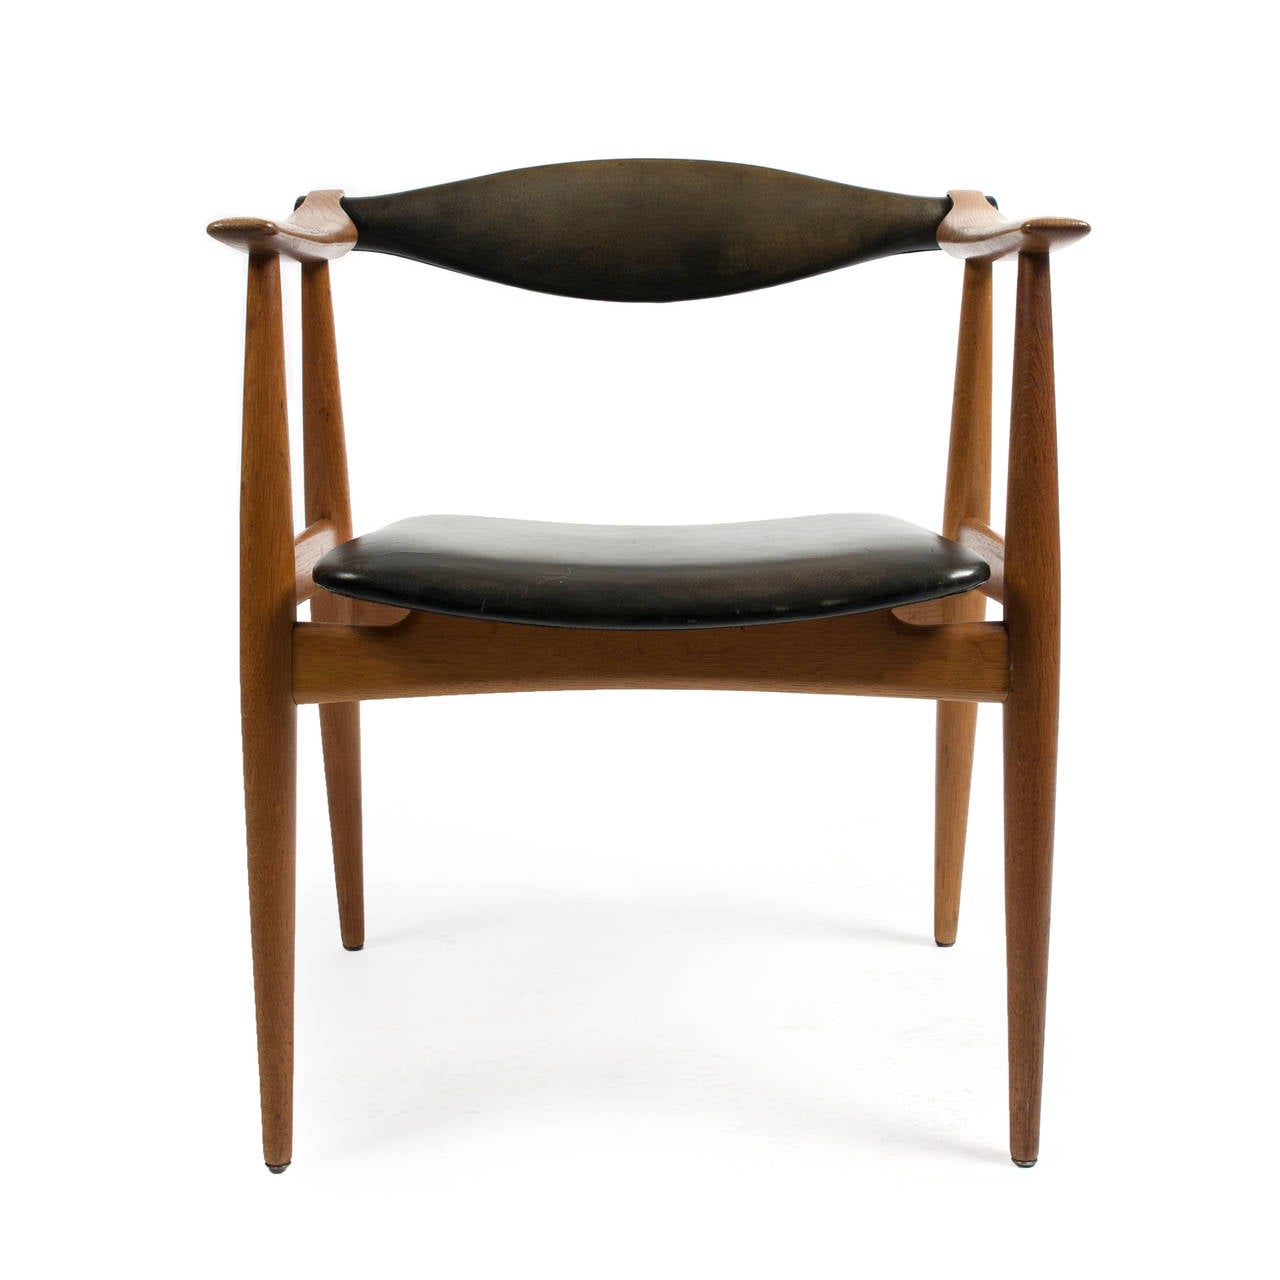 A set of four Hans J. Wegner oak dining chairs with adjustable back, upholstered with original black-dyed natural leather. 

Designed by Hans J. Wegner 1959 and made by Carl Hansen & Son, Denmark.

Beautiful original condition.